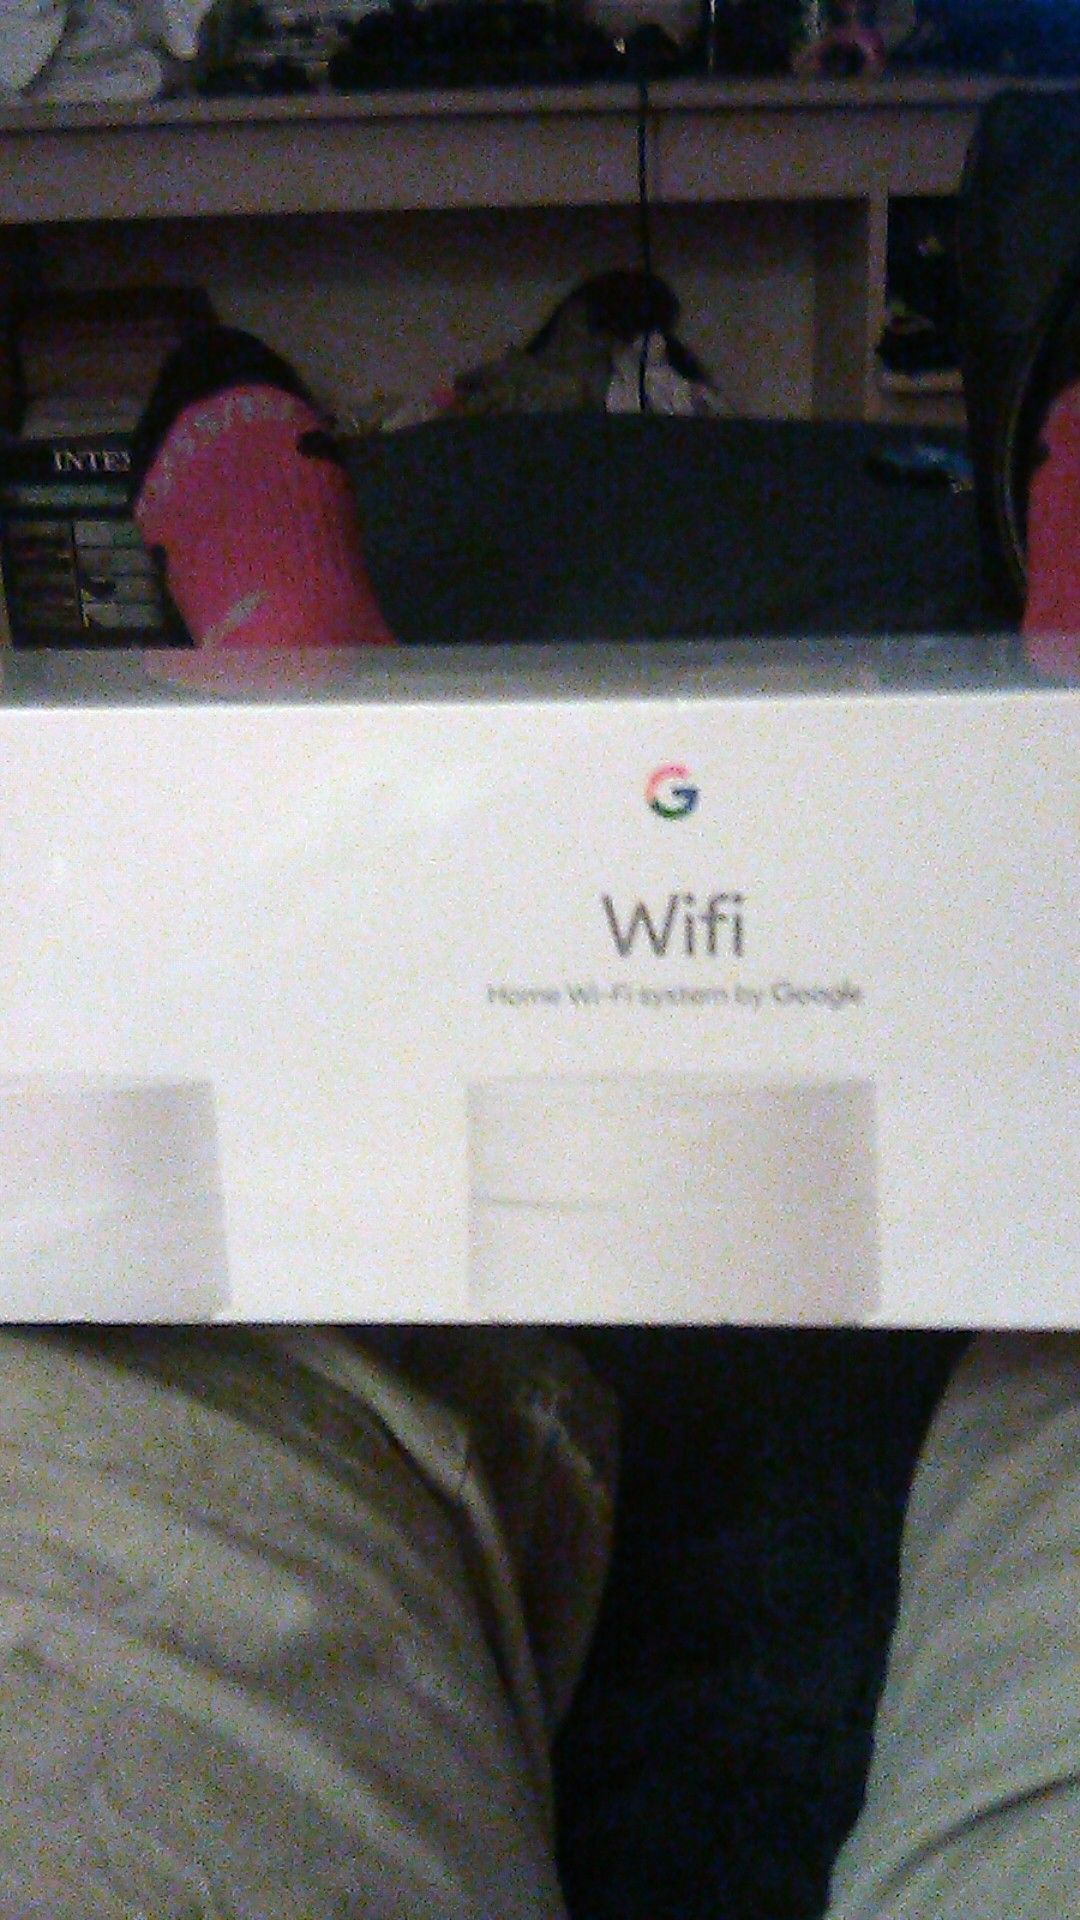 Home Wi-Fi system by google